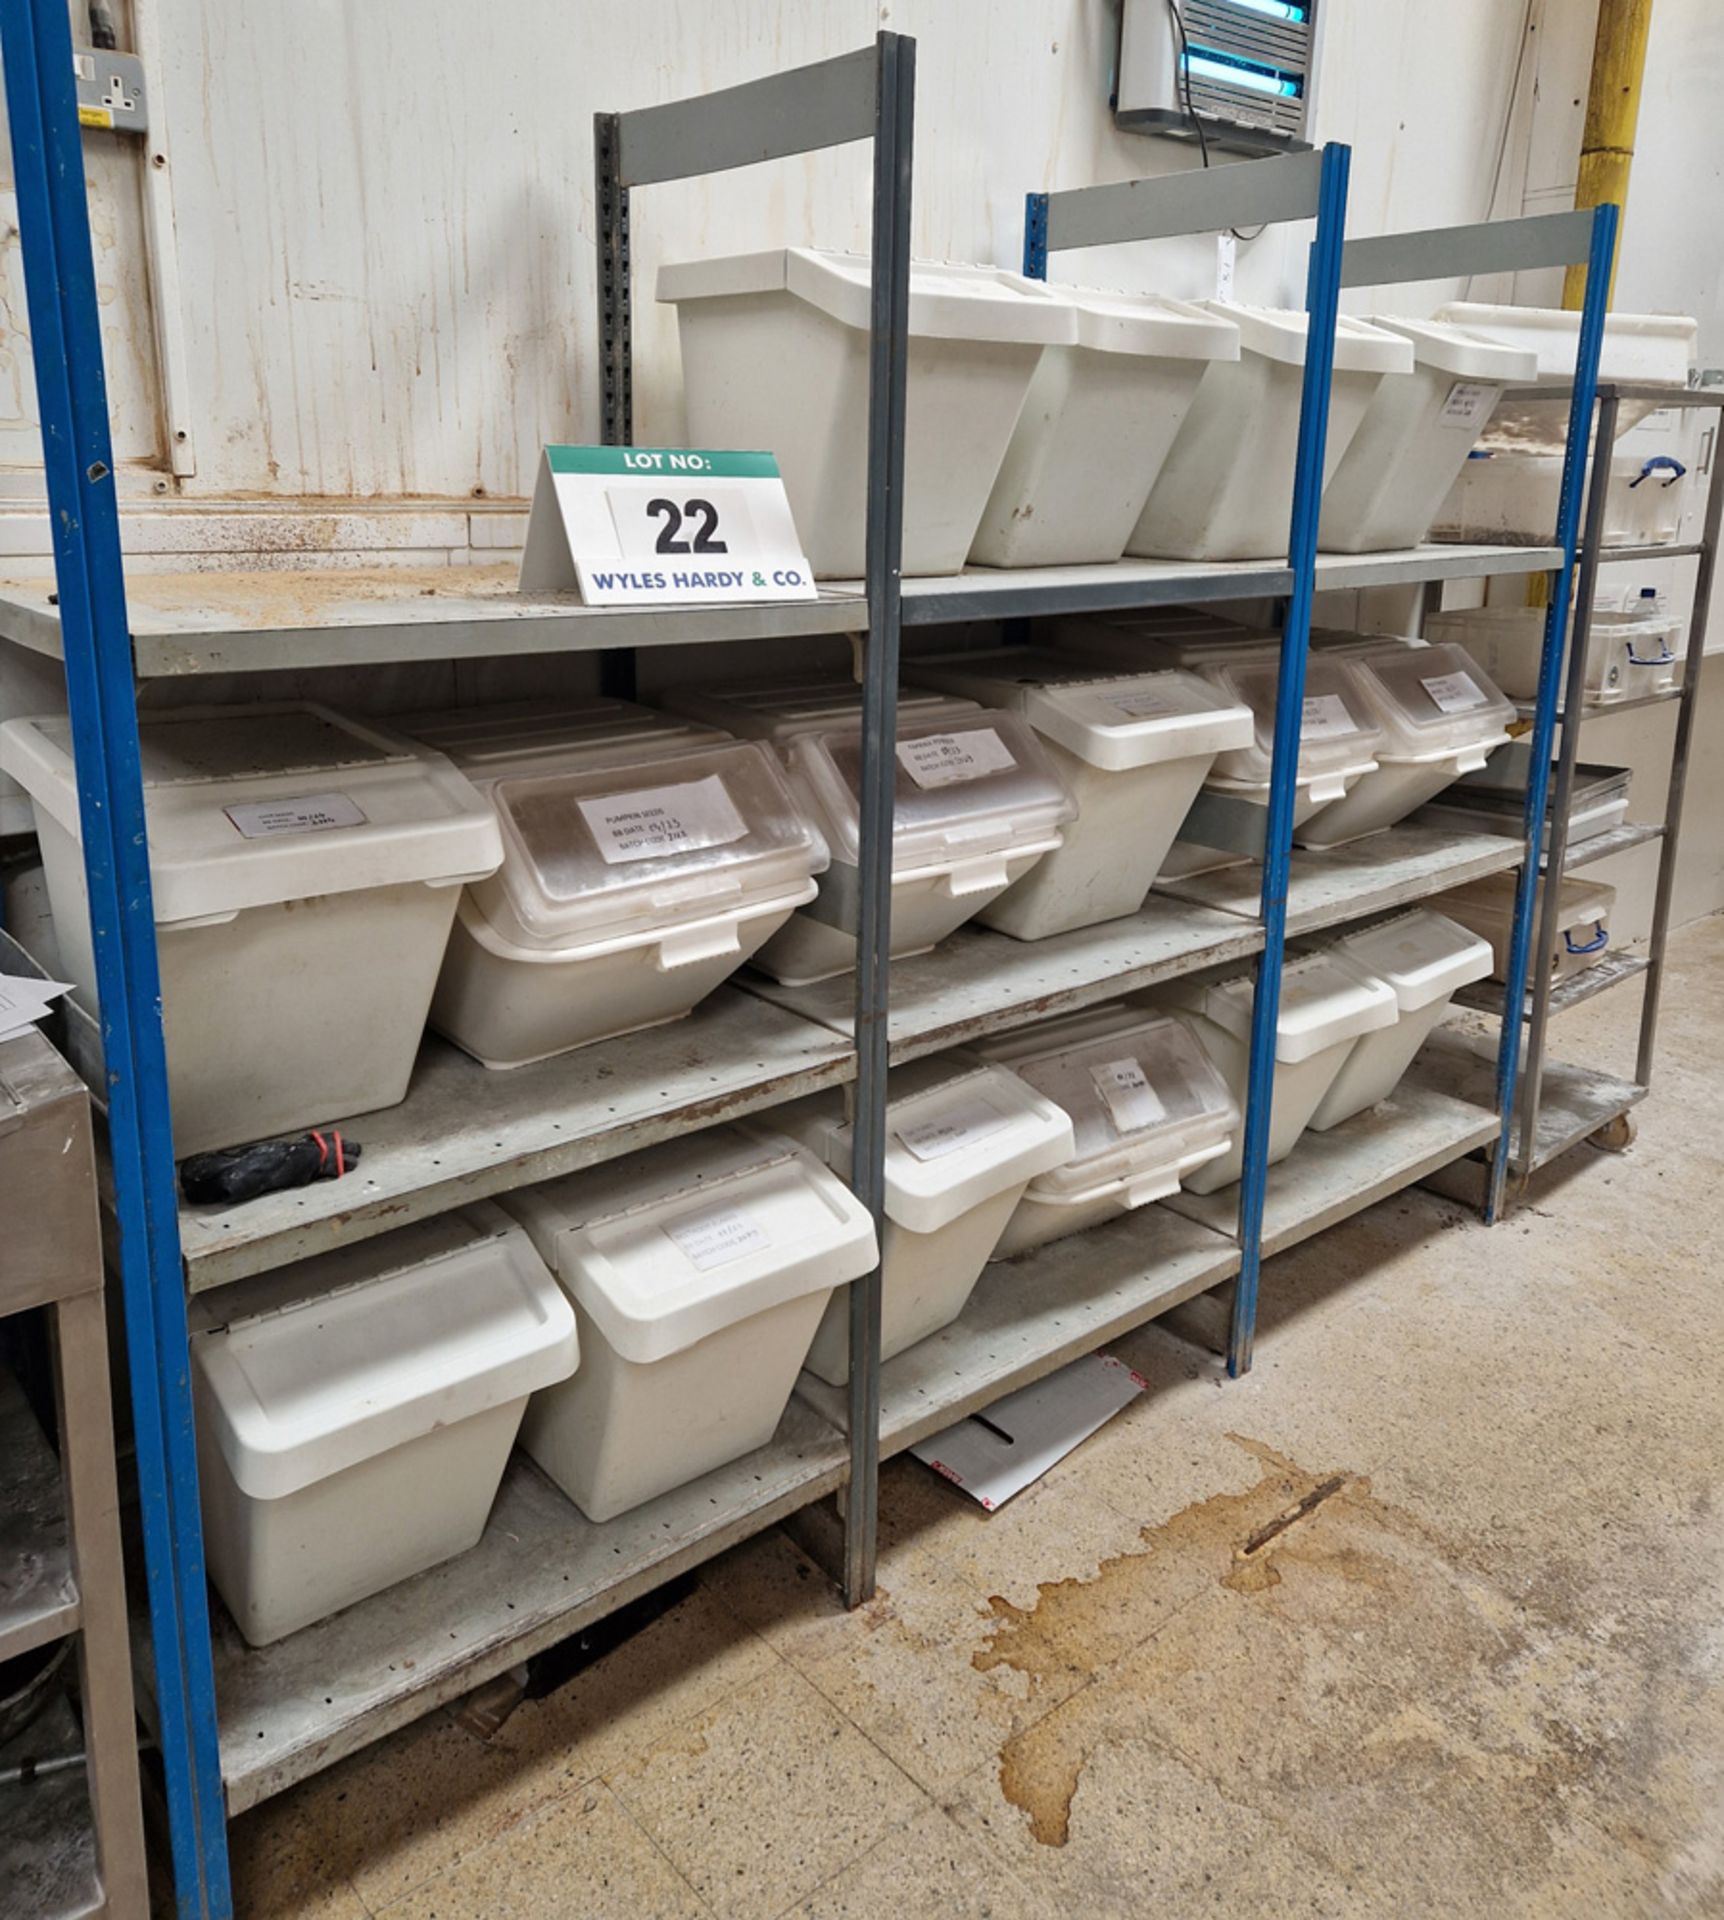 Three 1M Bays Light Duty Steel Shelving - fitted 3-Shelves, with Sixteen Various White Plastic